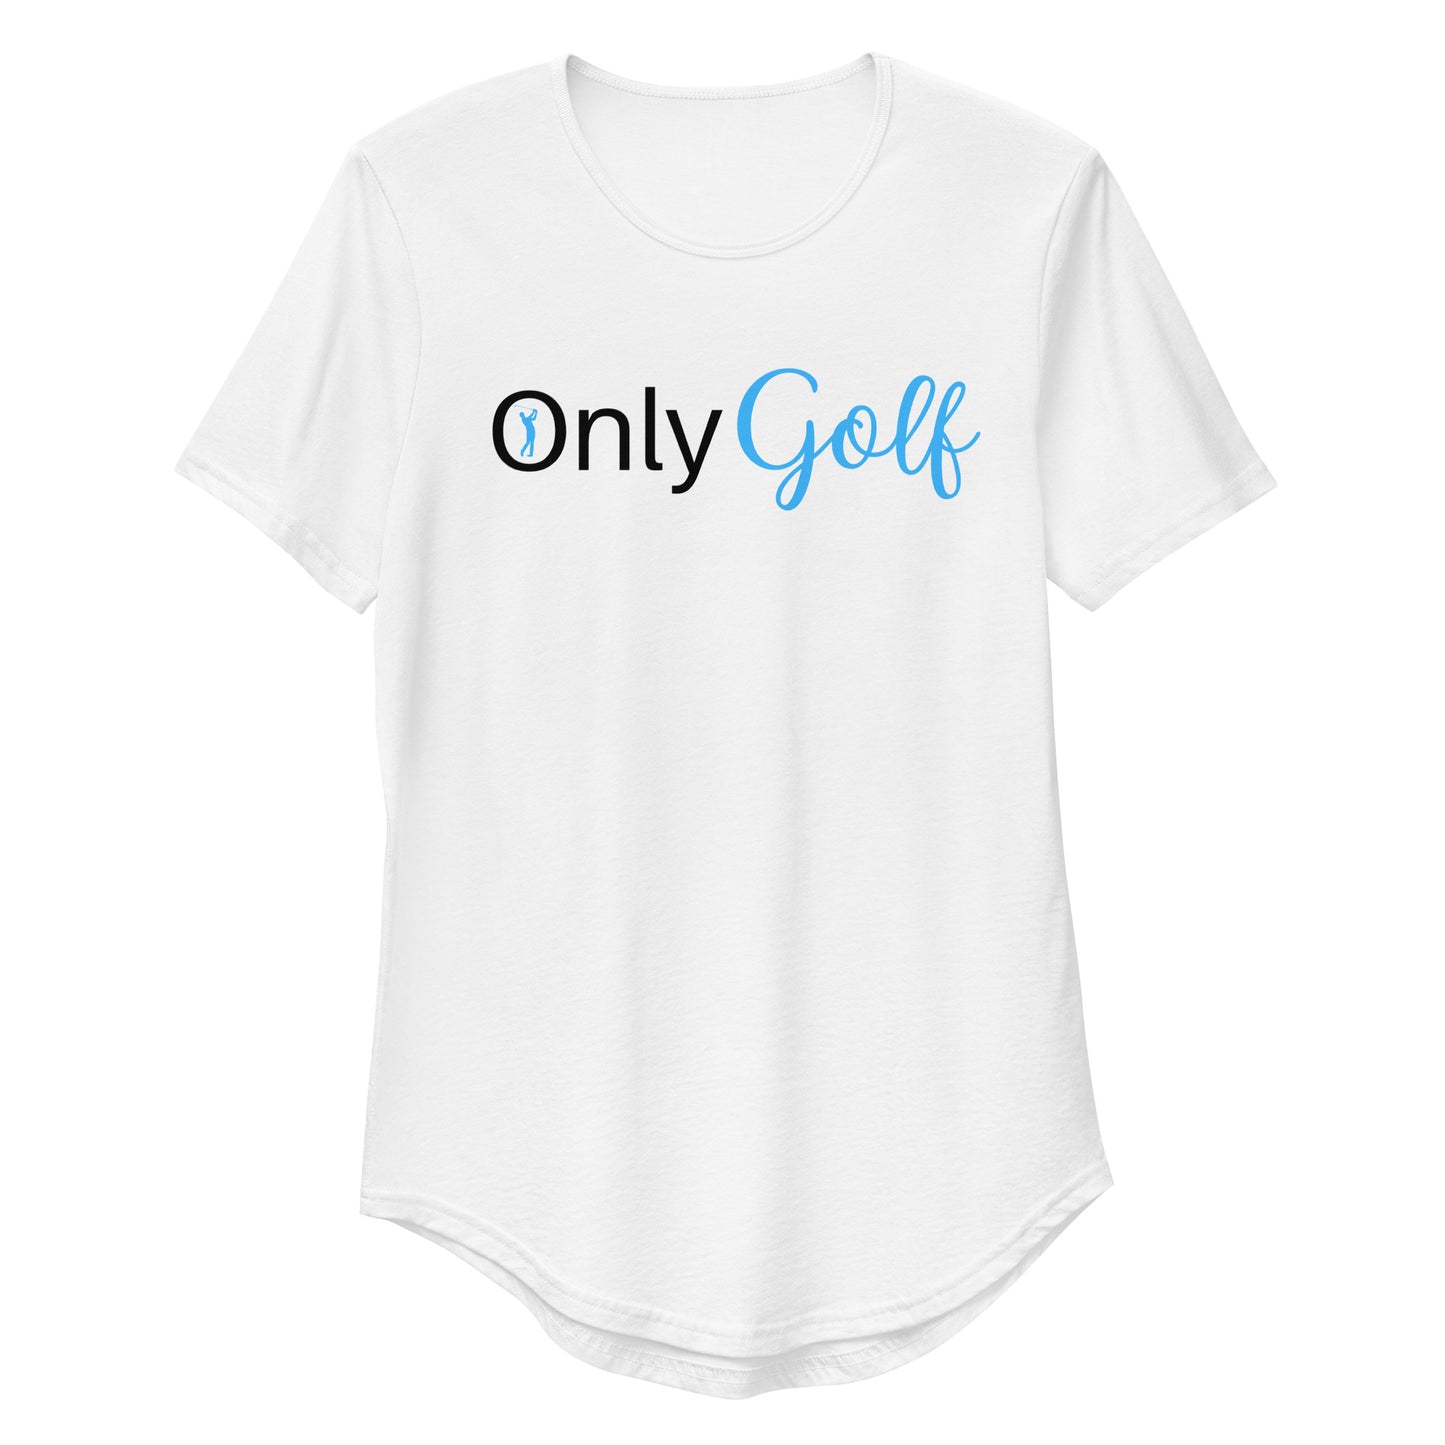 Red Weapon Only Golf Curved Hem T-Shirt